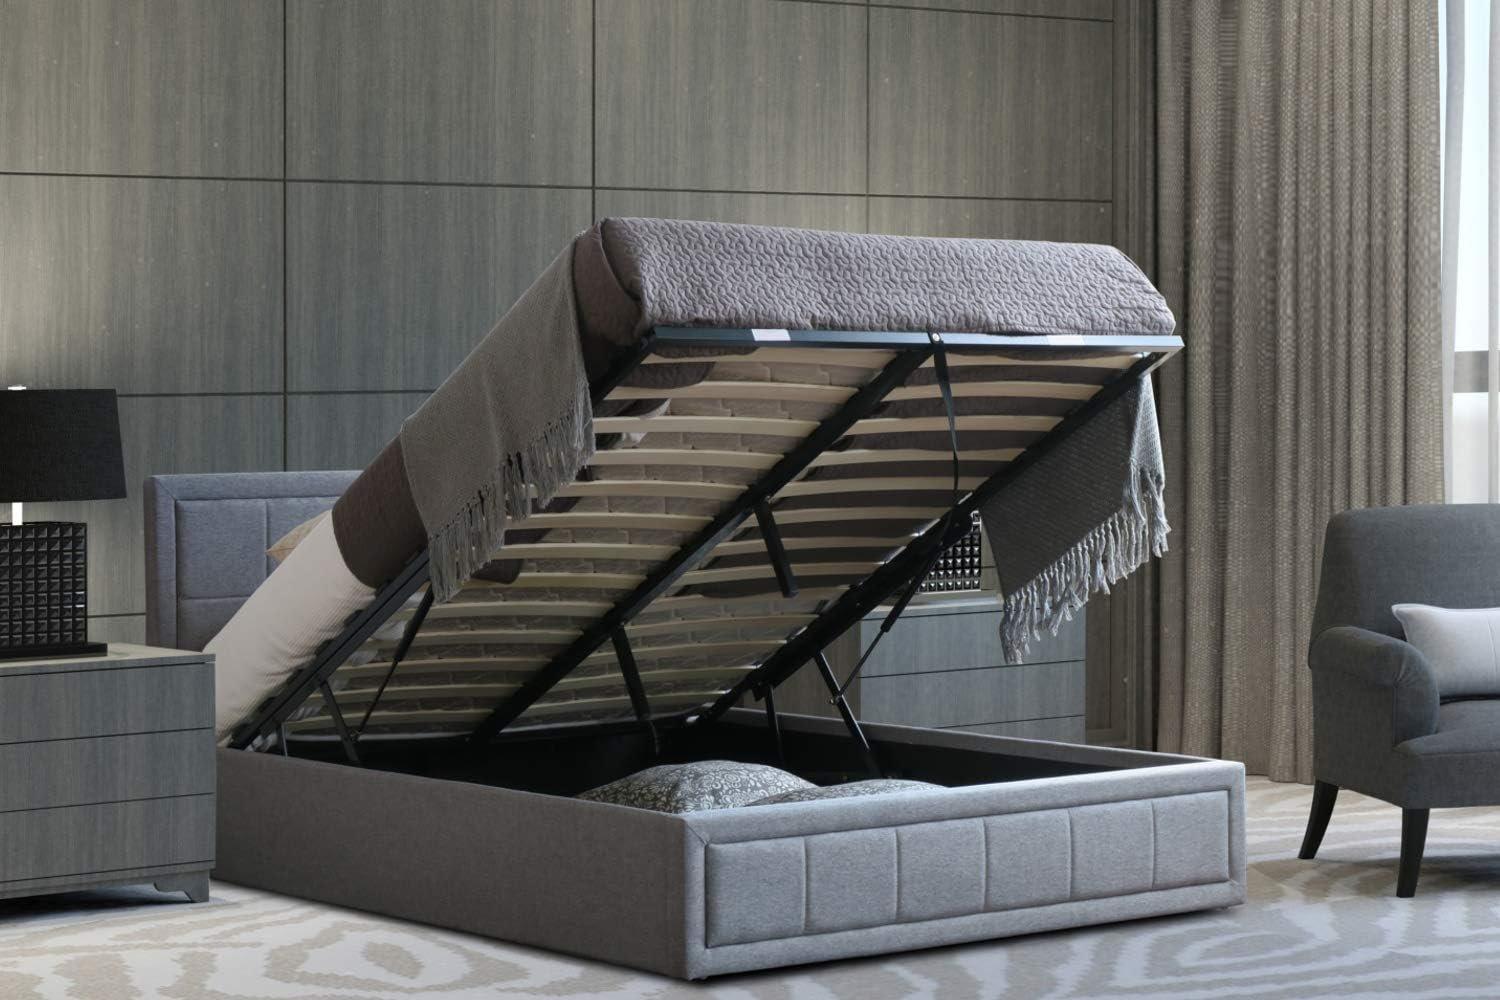 Upholstered Ottoman Bed Frame with Storage